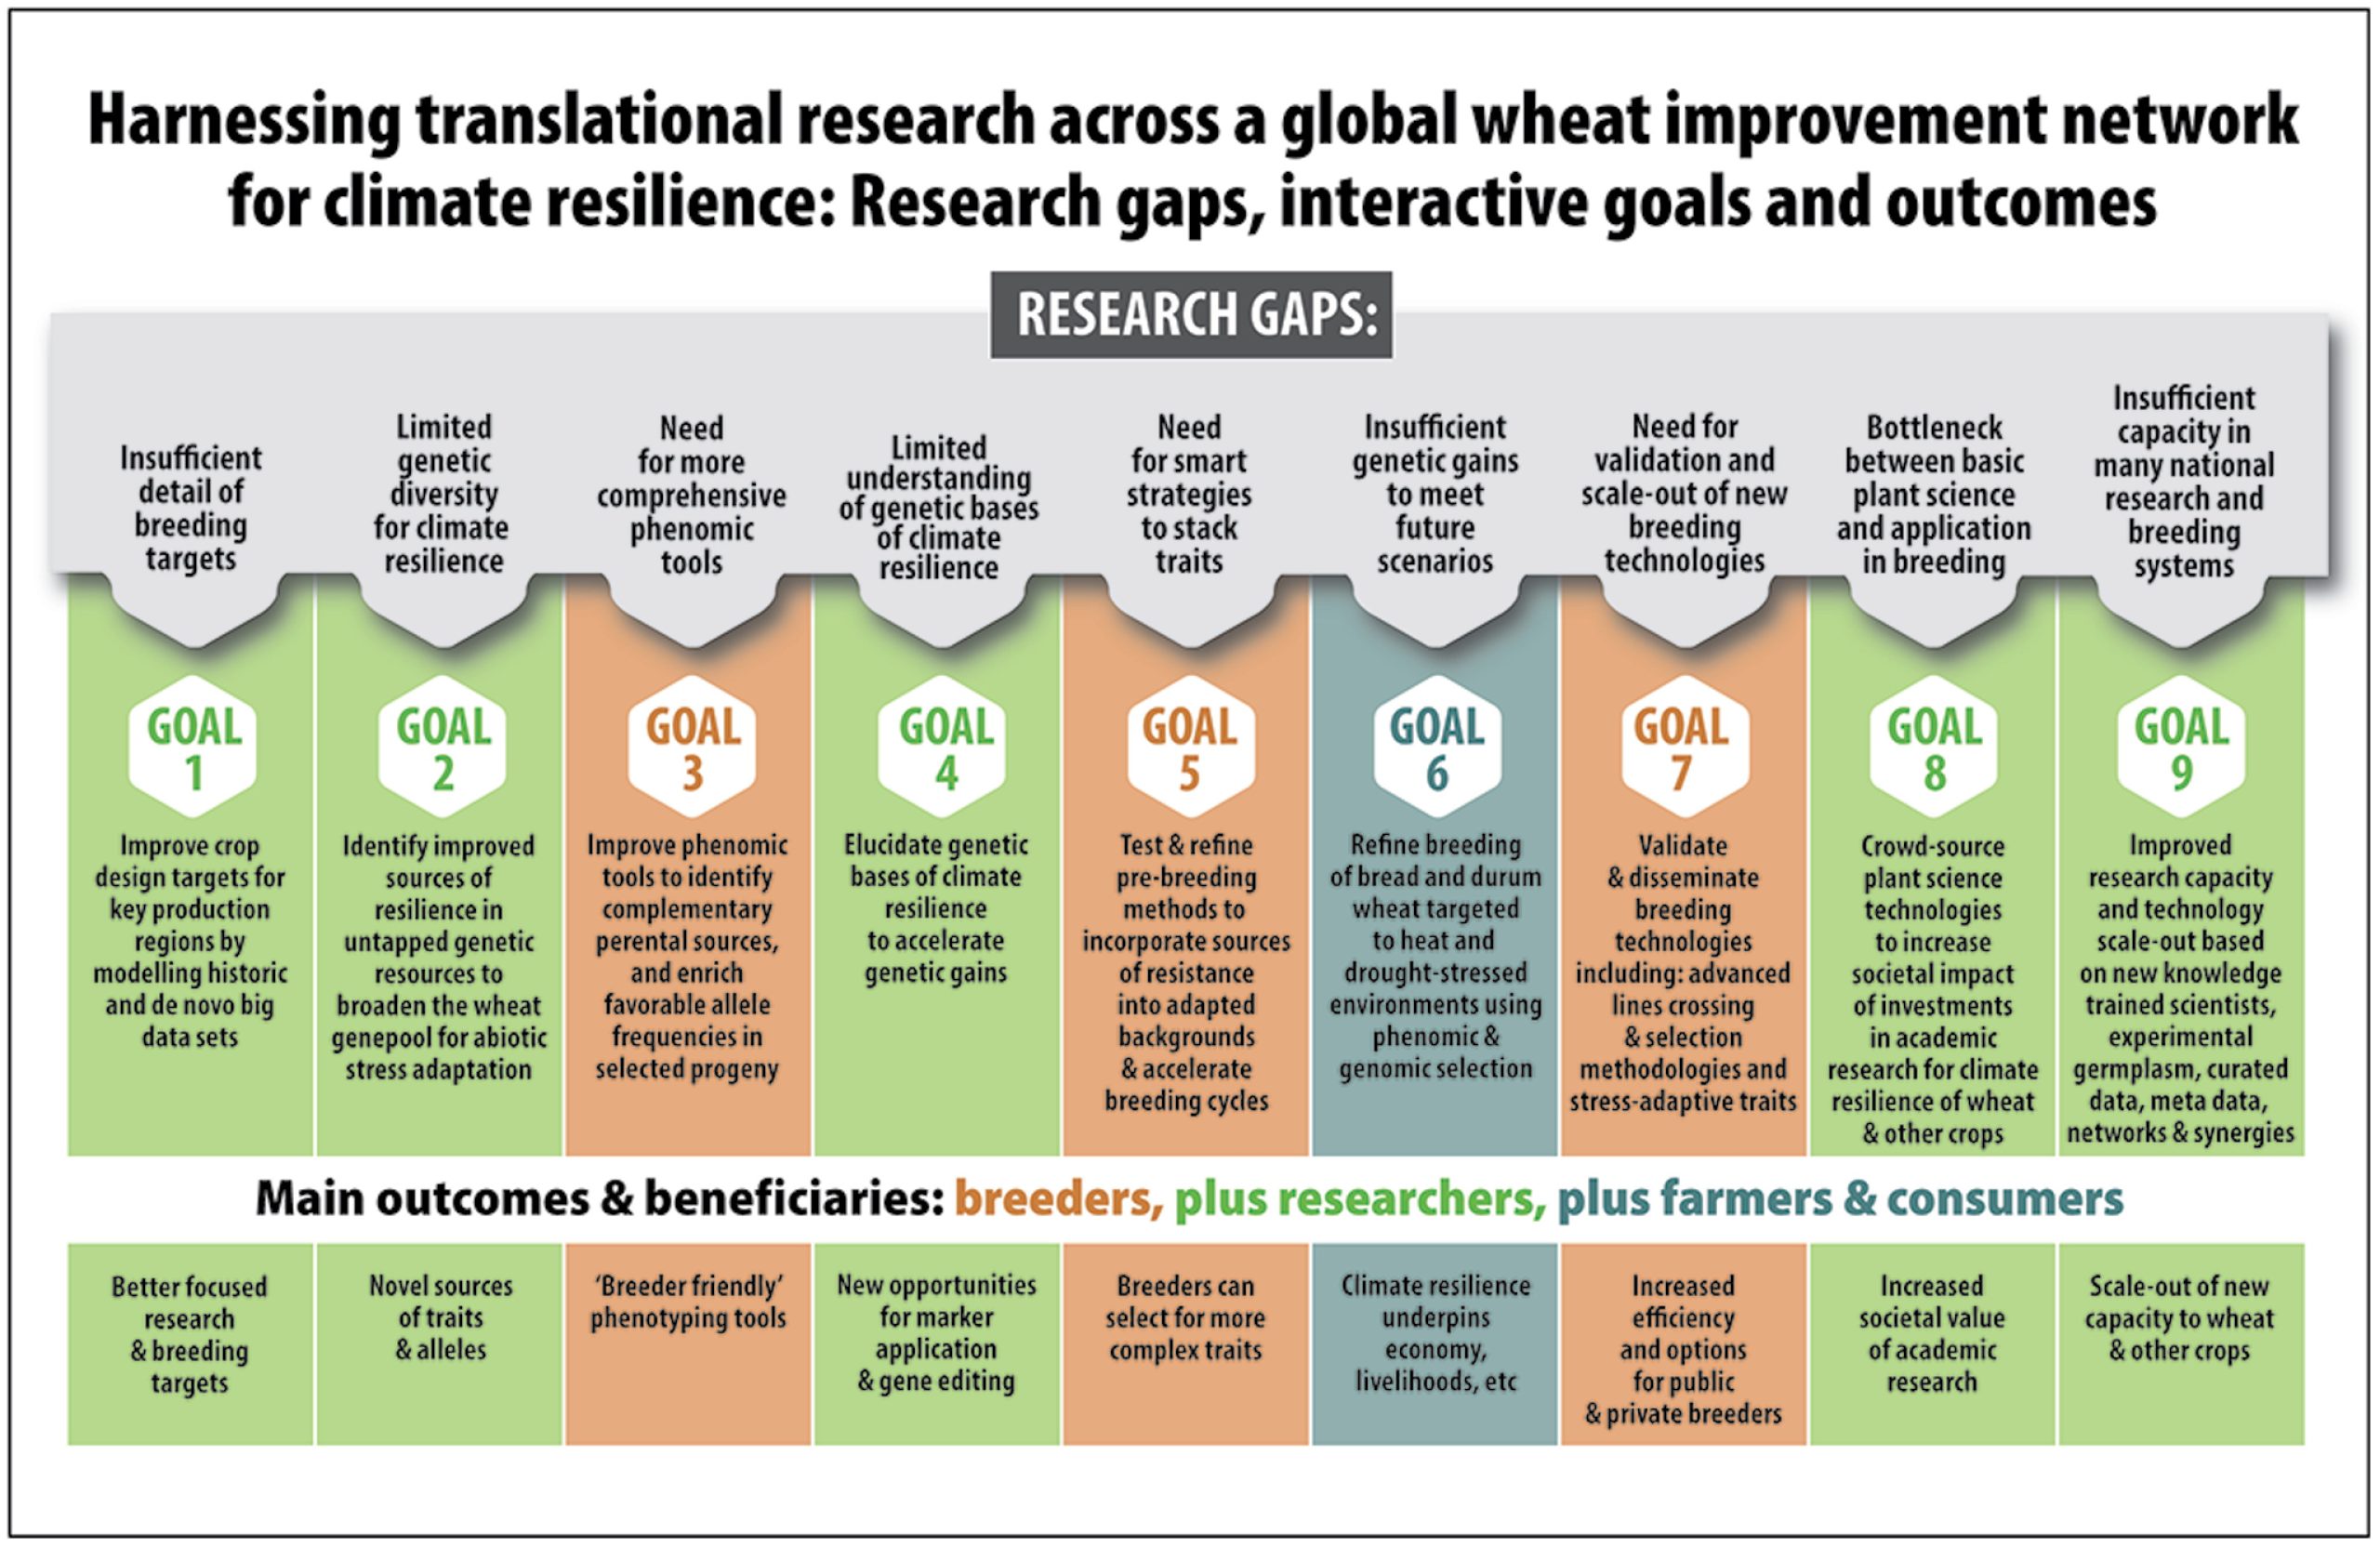 Harnessing research across a global wheat improvement network for climate resilience: research gaps, interactive goals, and outcomes. 